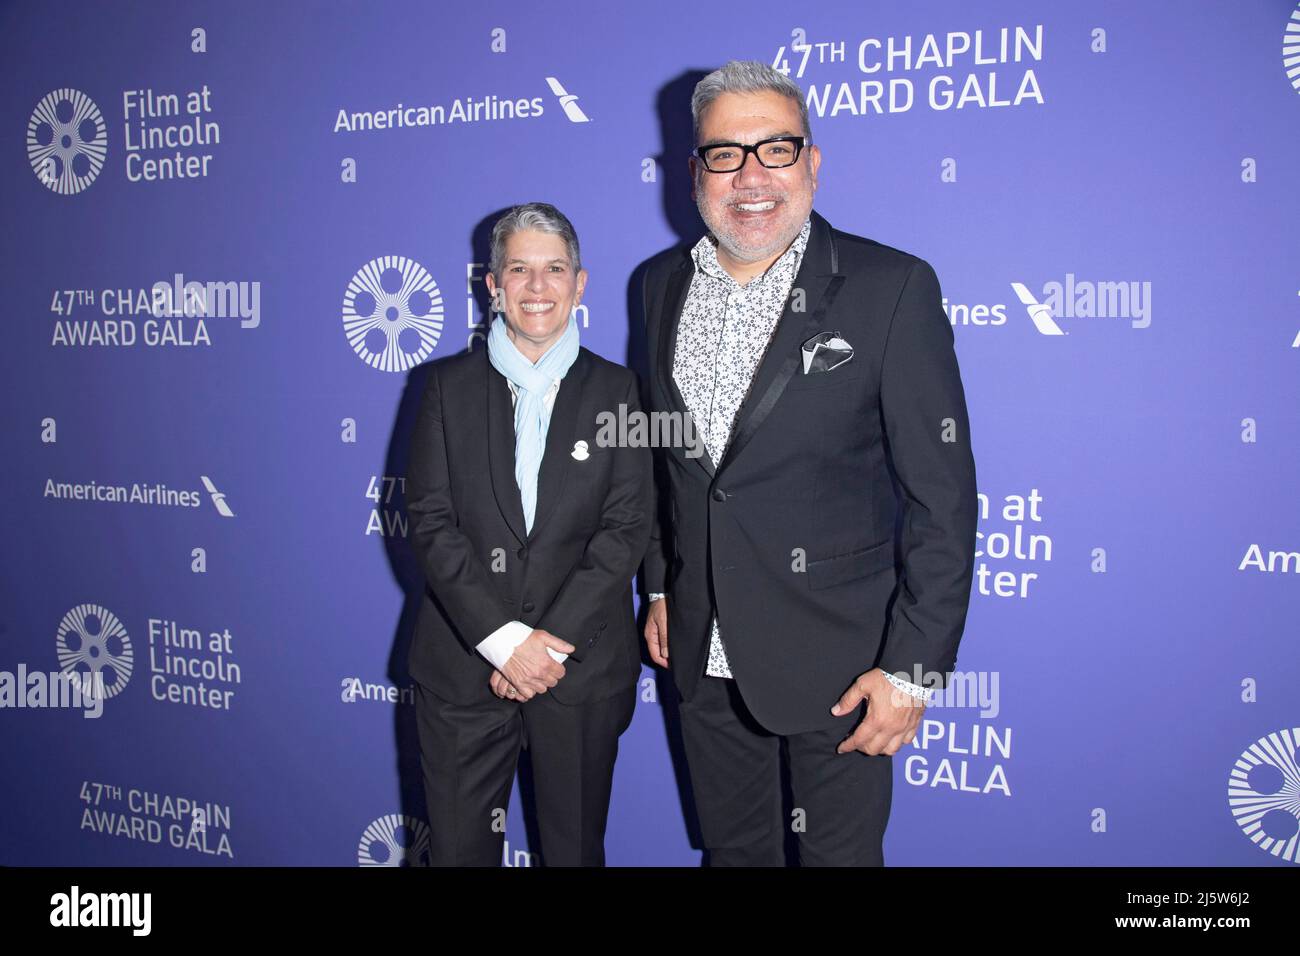 New York, United States. 25th Apr, 2022. FLC President Lesli Klainberg and Senior Vice President of FLC and Executive Director of the New York Film Festival Eugene Hernandez attend the 47th Chaplin Award Gala honoring Cate Blanchett at Alice Tully Hall, Lincoln Center in New York City. Credit: SOPA Images Limited/Alamy Live News Stock Photo